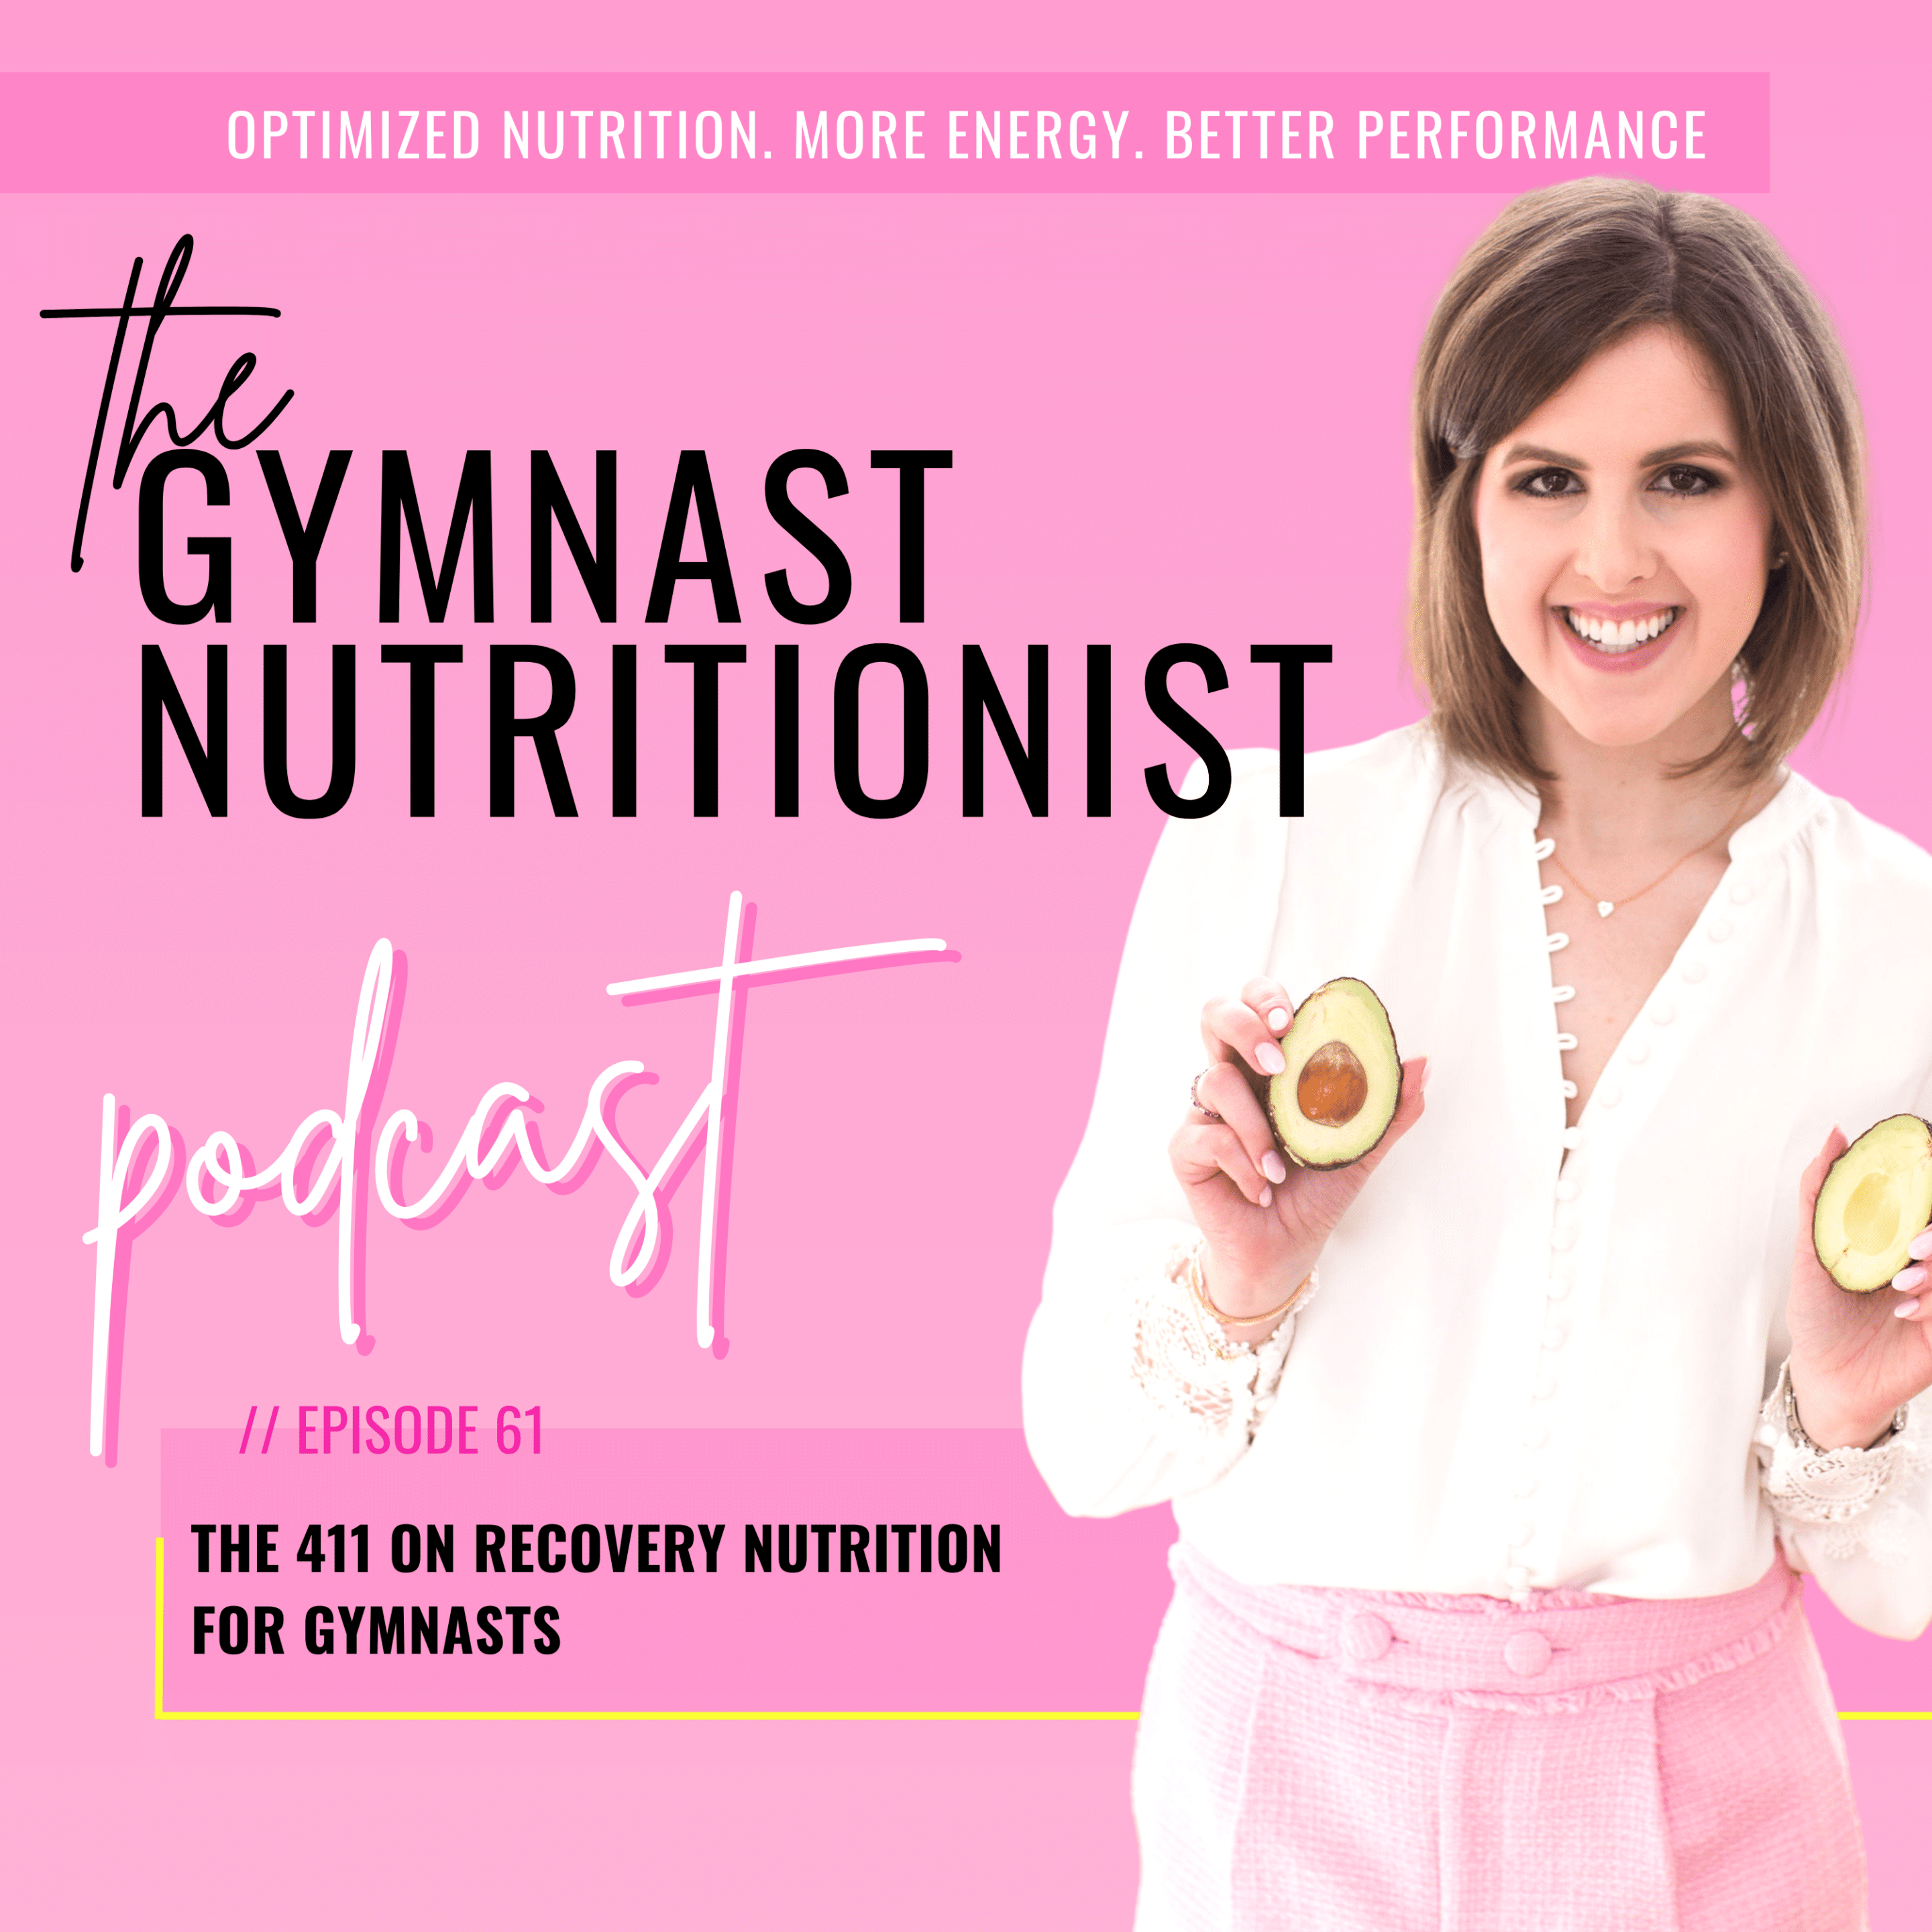 Episode 61: The 411 on Recovery Nutrition for Gymnasts